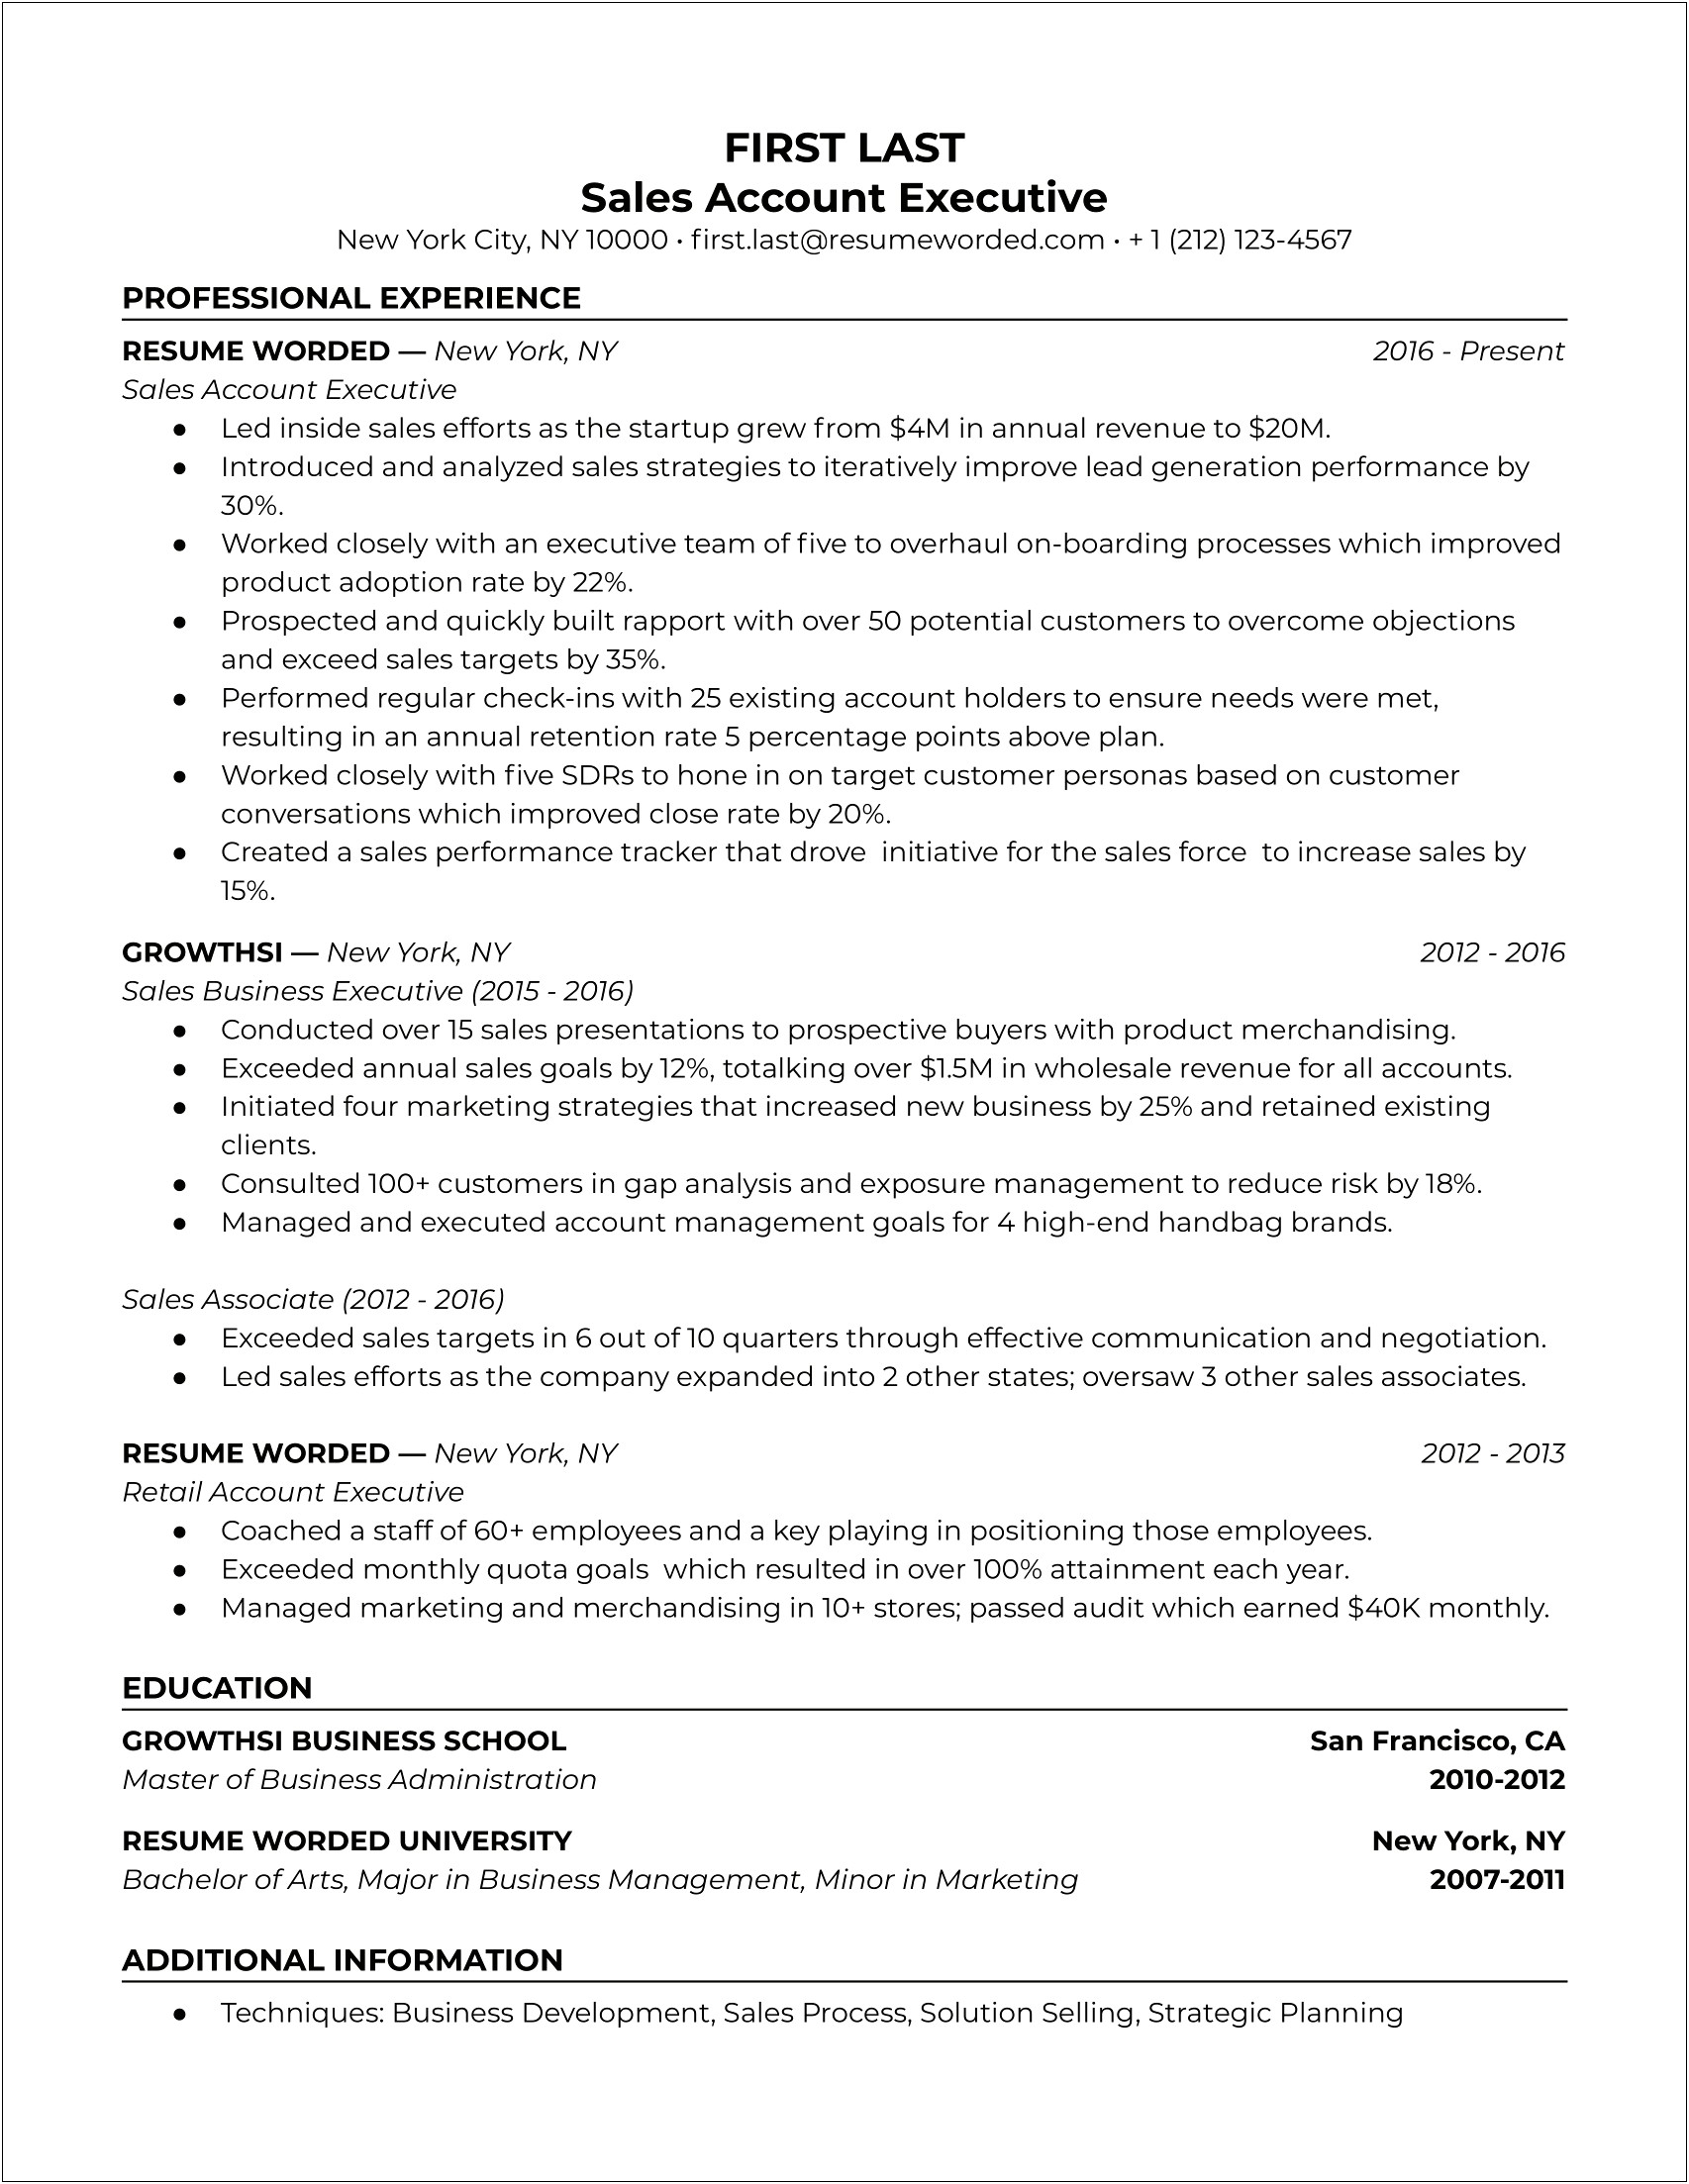 Sample Resumes For Sales Recruiters